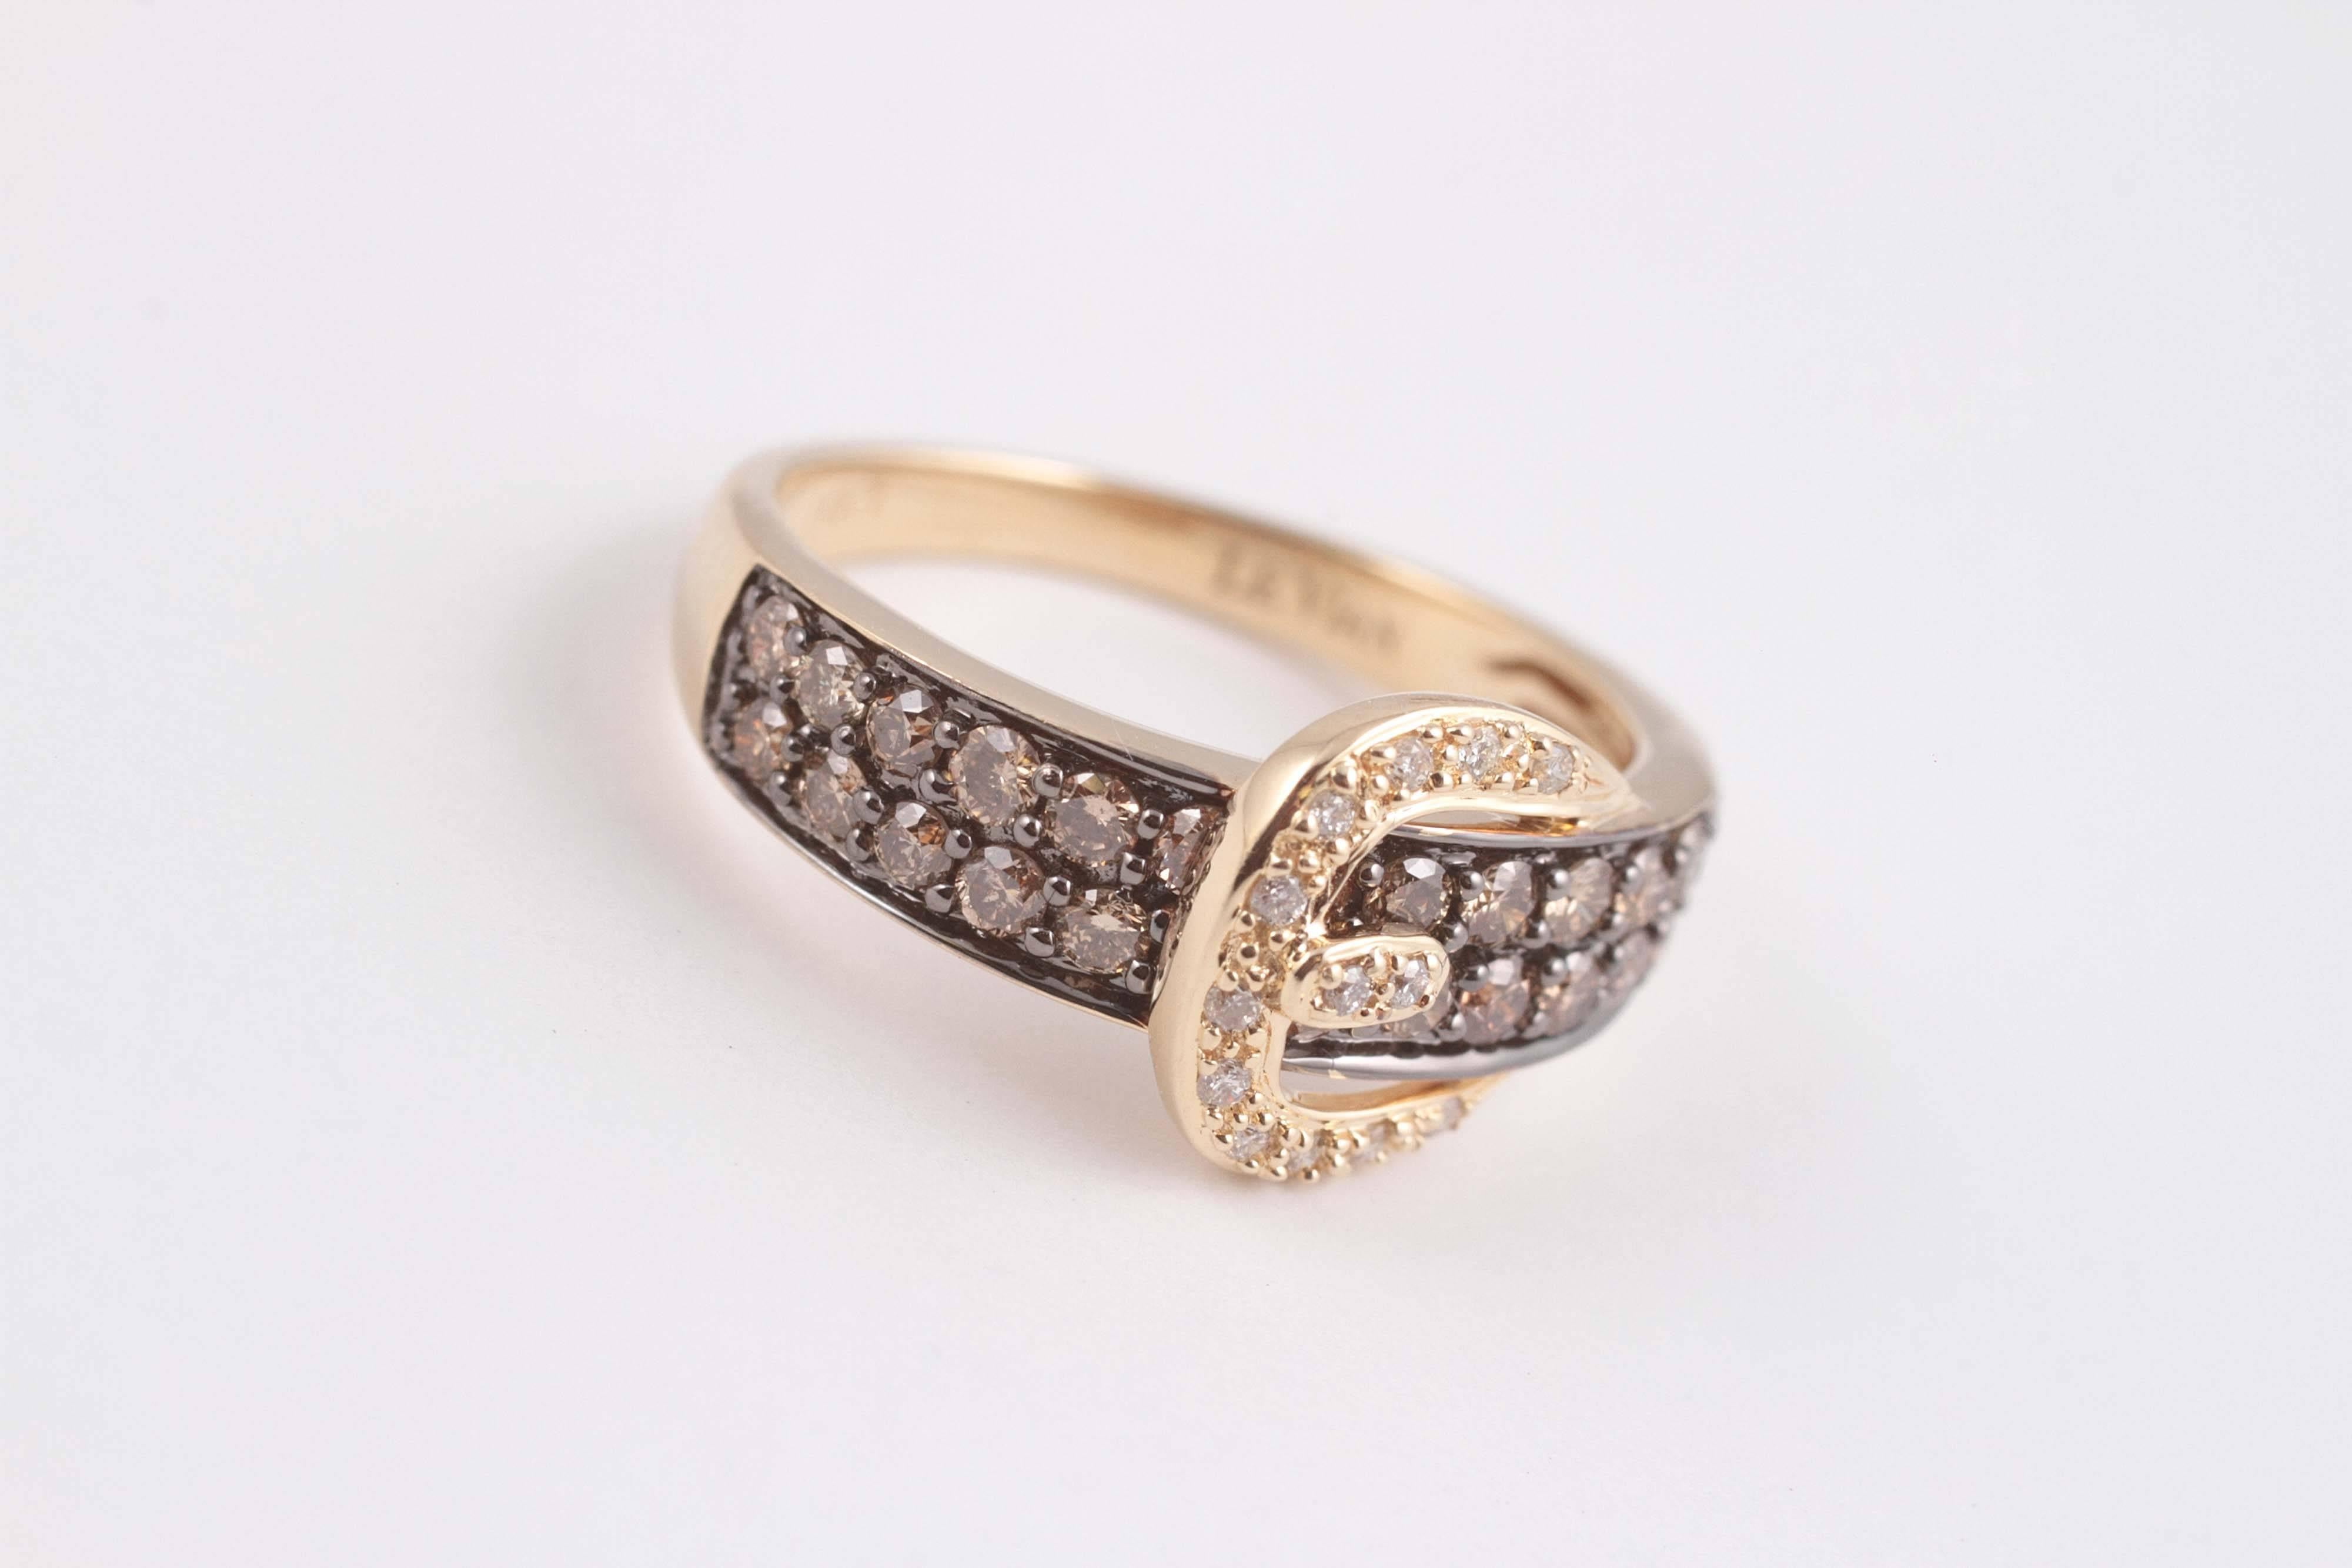 In 14 karat yellow gold, with brown diamonds, size 7 1/4.